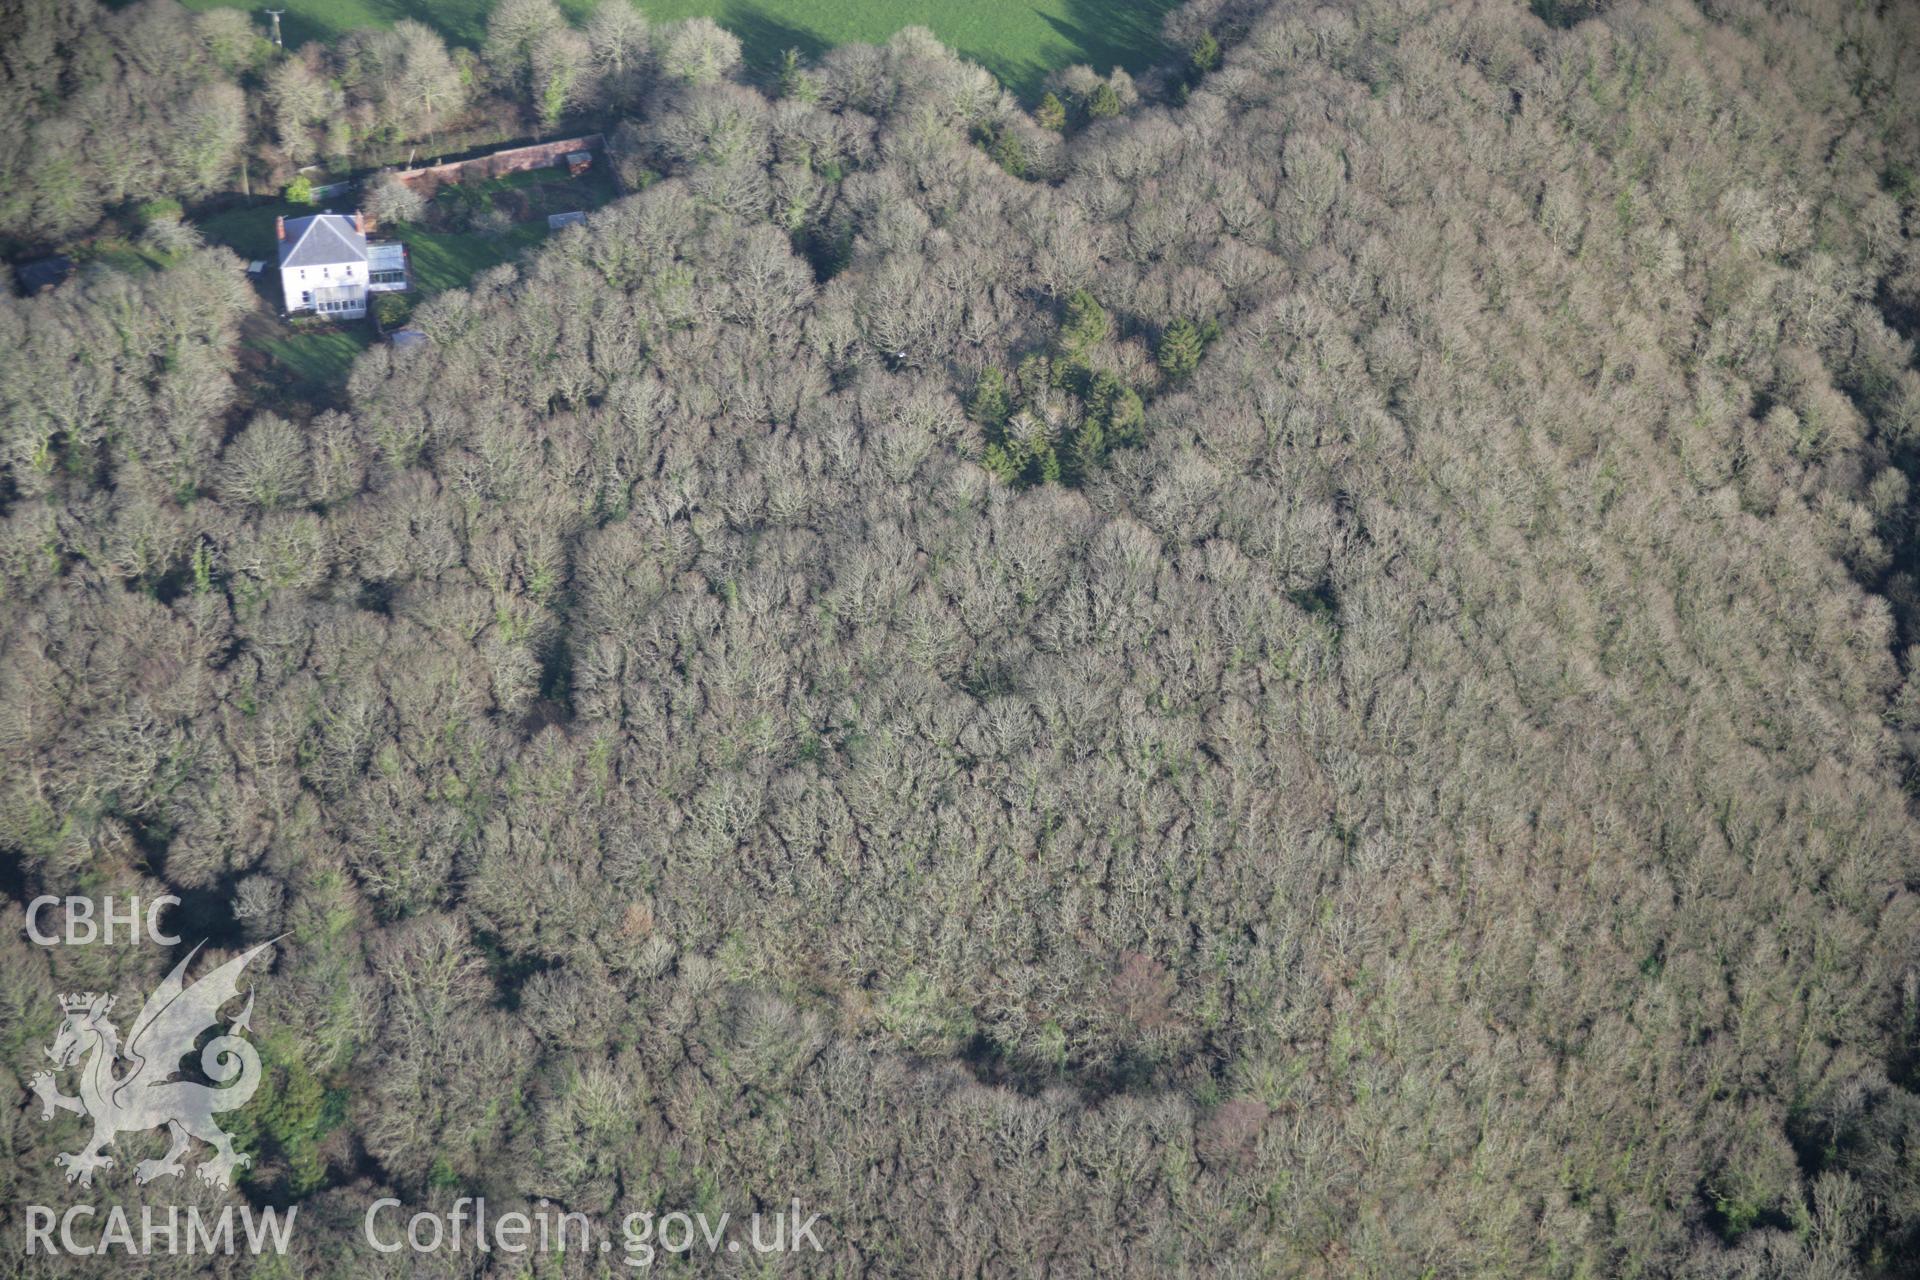 RCAHMW colour oblique aerial photograph of Little Treffgarne Wood Enclosureand Hazelgrove forts, view under trees from the west Taken on 11 January 2006 by Toby Driver.